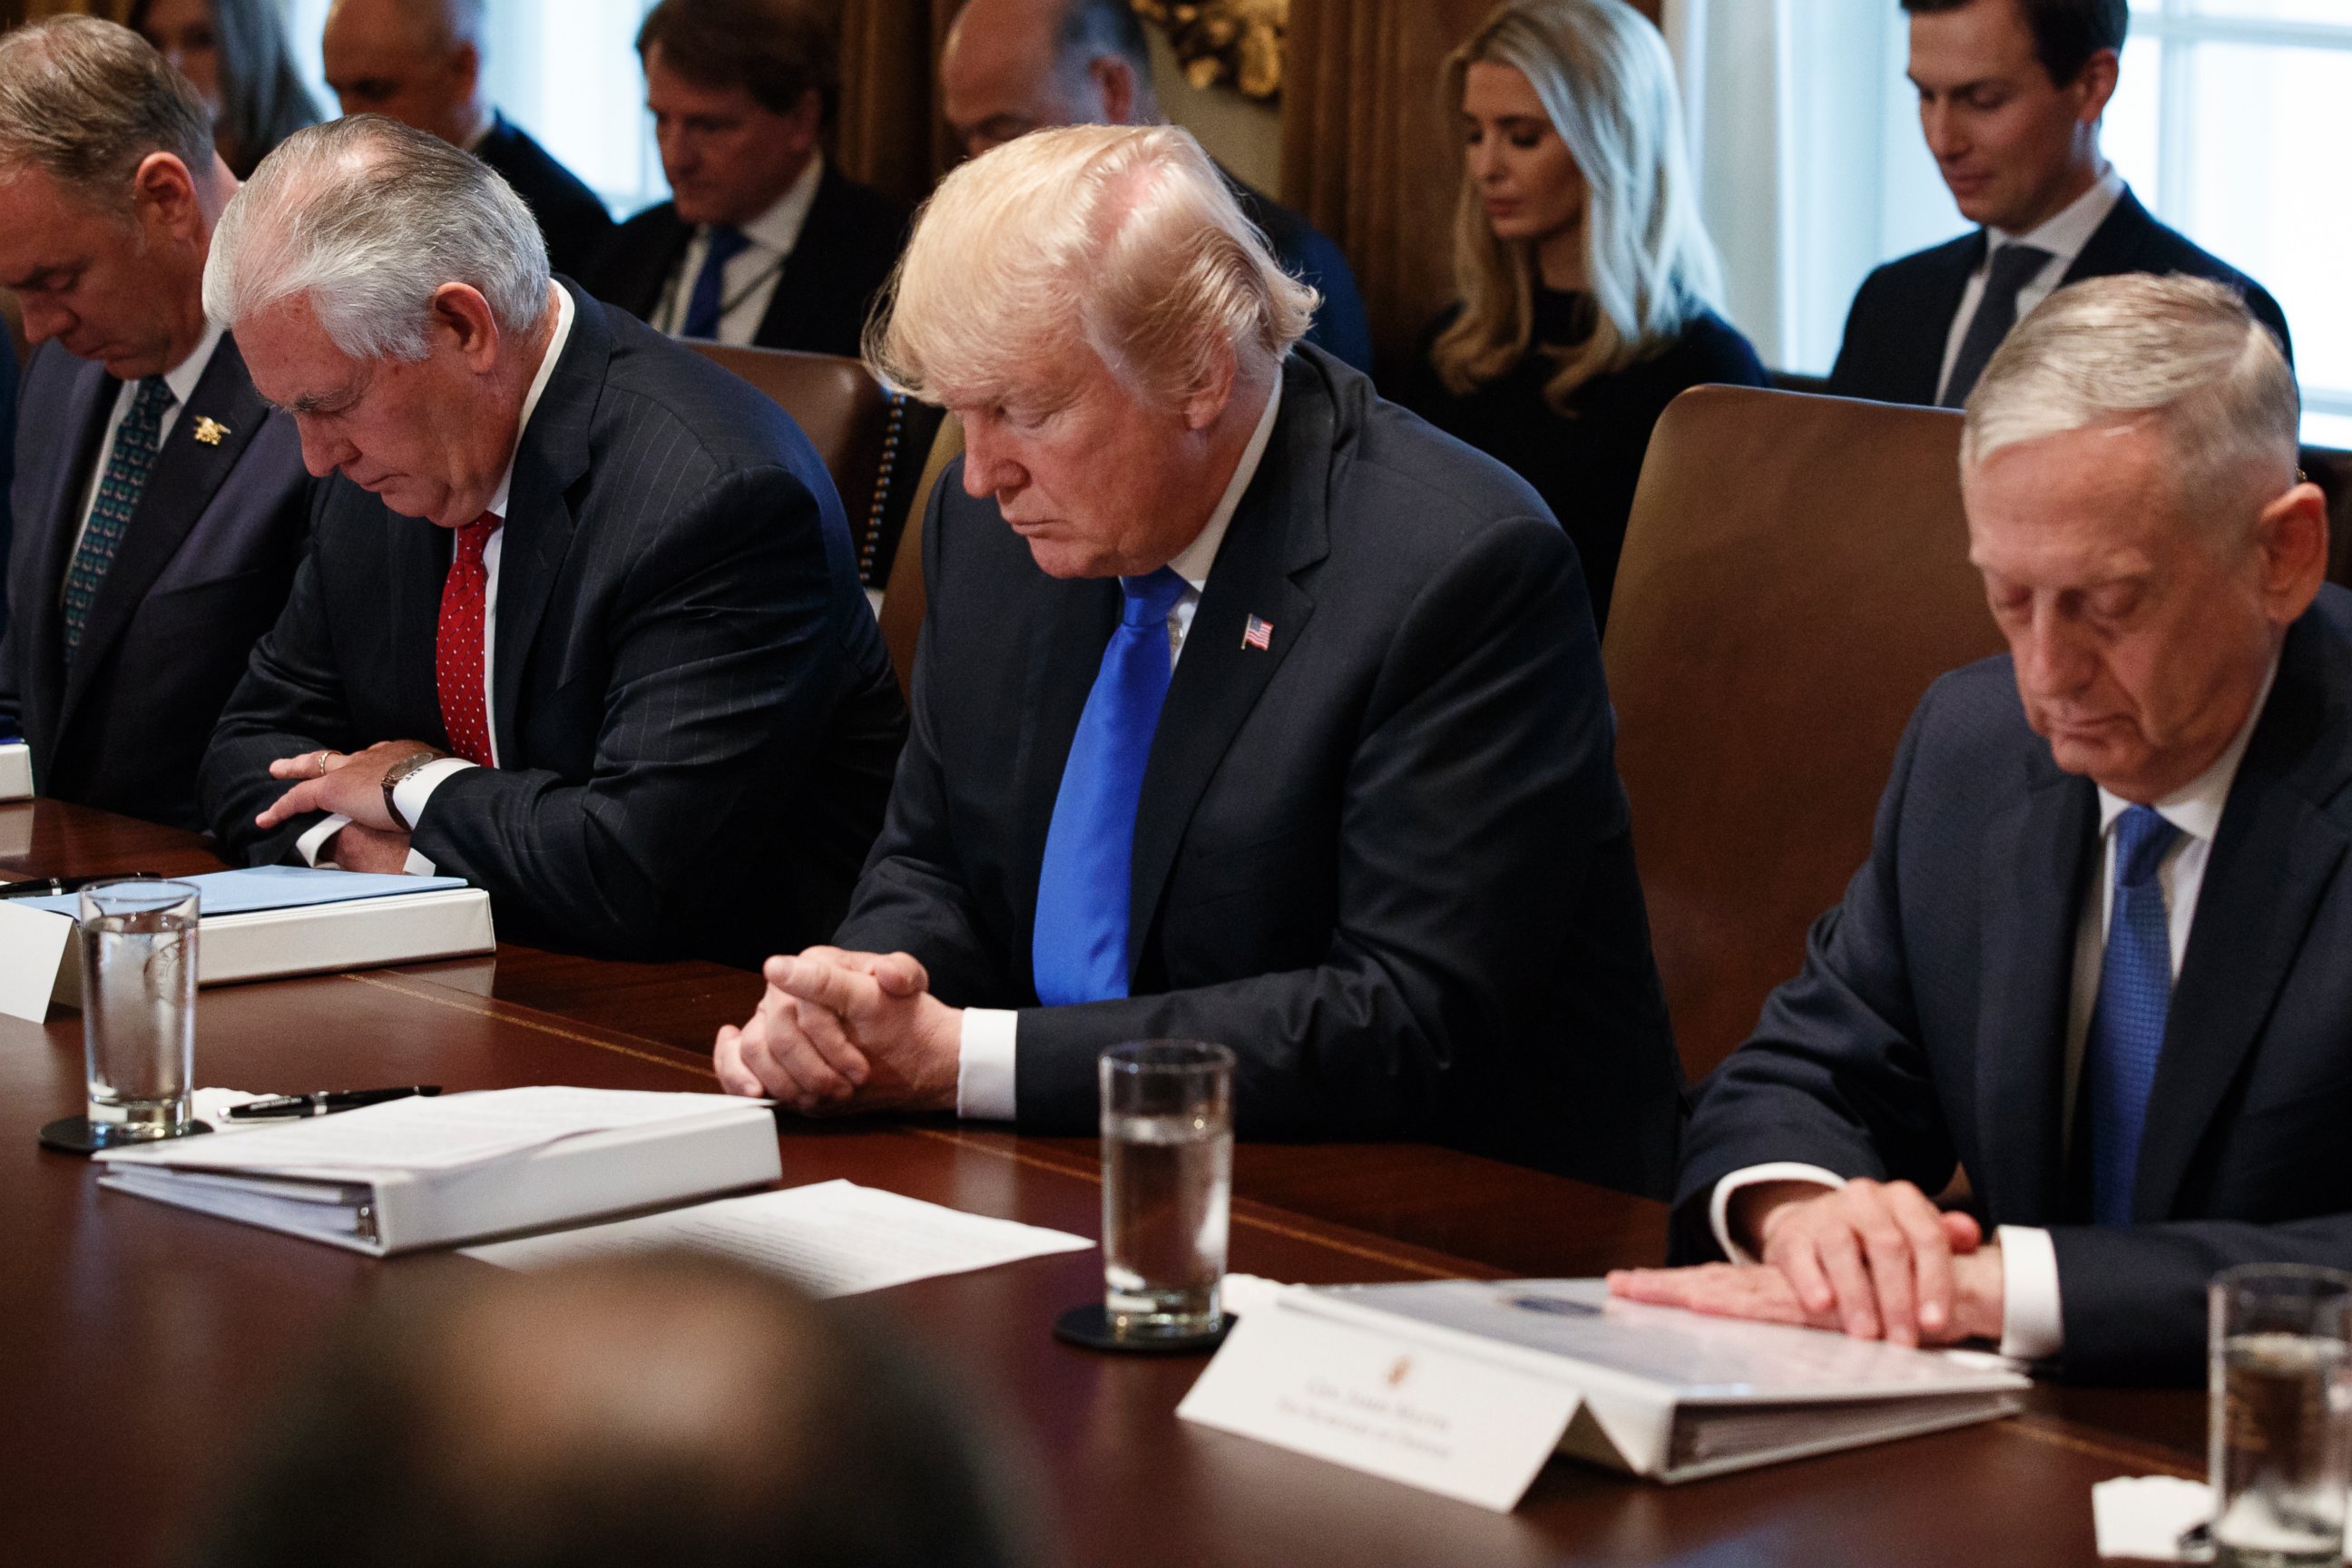 President Donald Trump prays during a cabinet meeting at the White House, Wednesday, Dec. 20, 2017, in Washington. From left, Secretary of Interior Ryan Zinke, Secretary of State Rex Tillerson, Trump, and Secretary of Defense Jim Mattis.